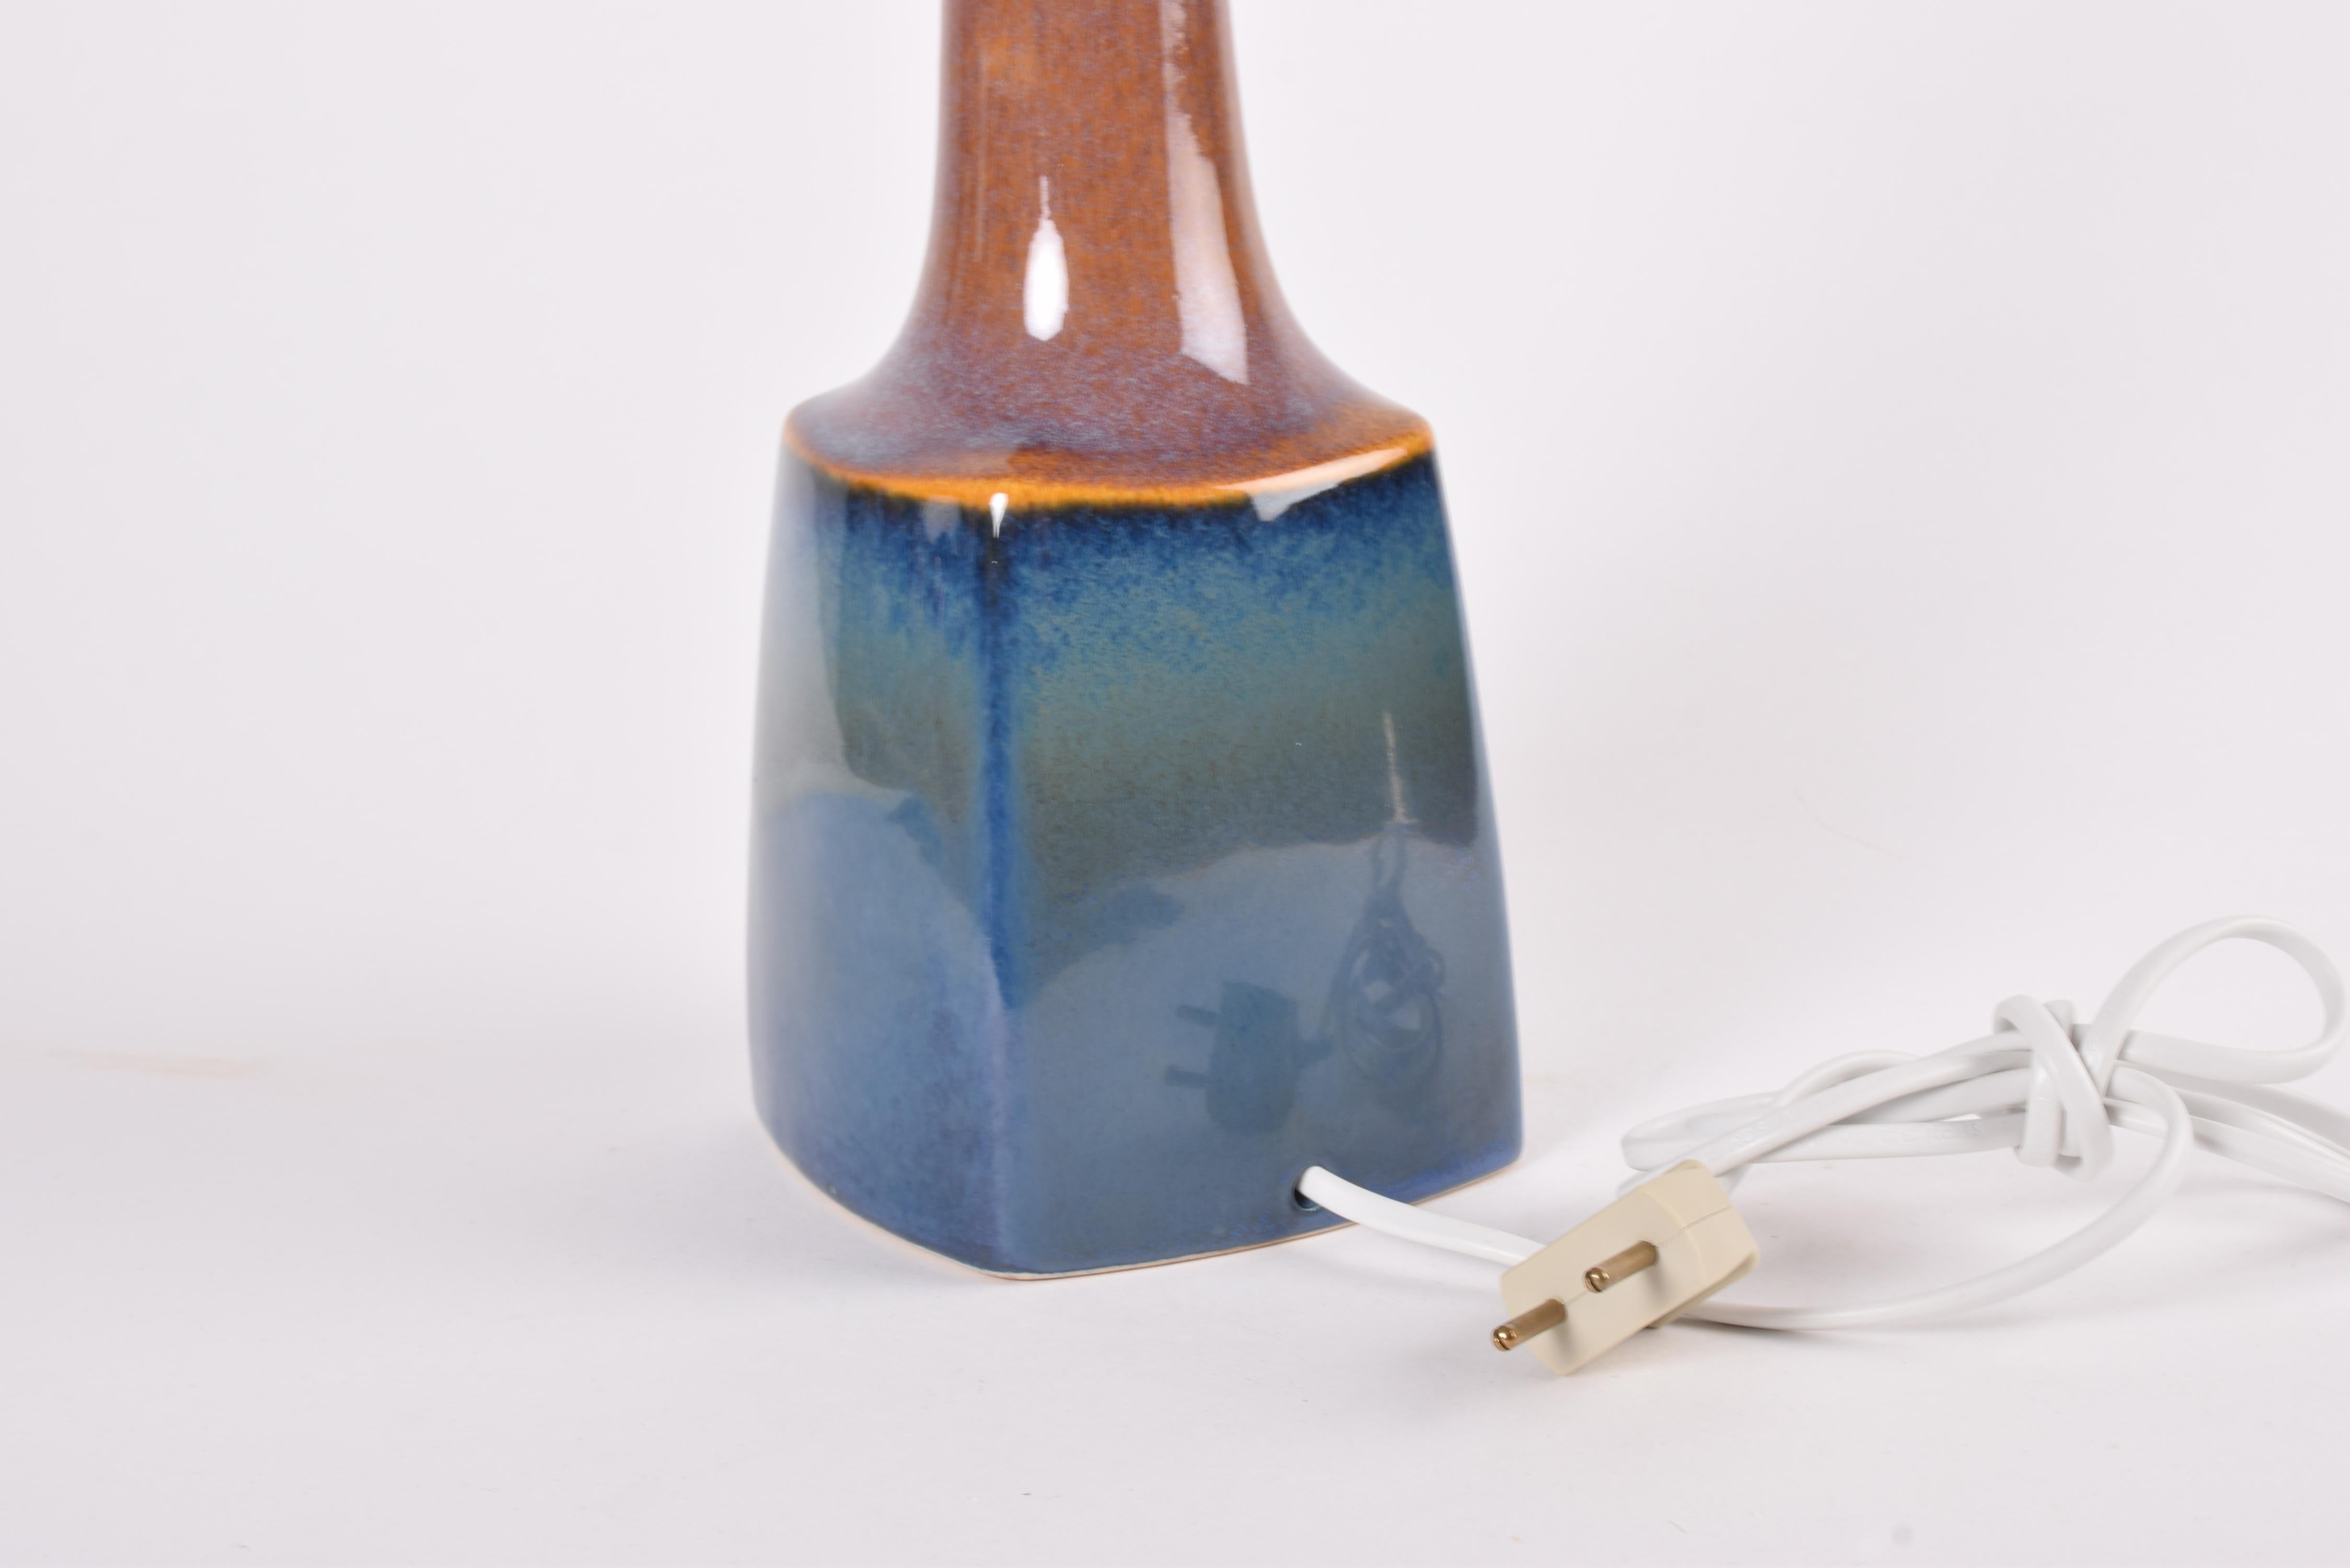 Tall Søholm Table Lamp with Blue Brown Glaze, Danish Modern Ligthing 1960s For Sale 1